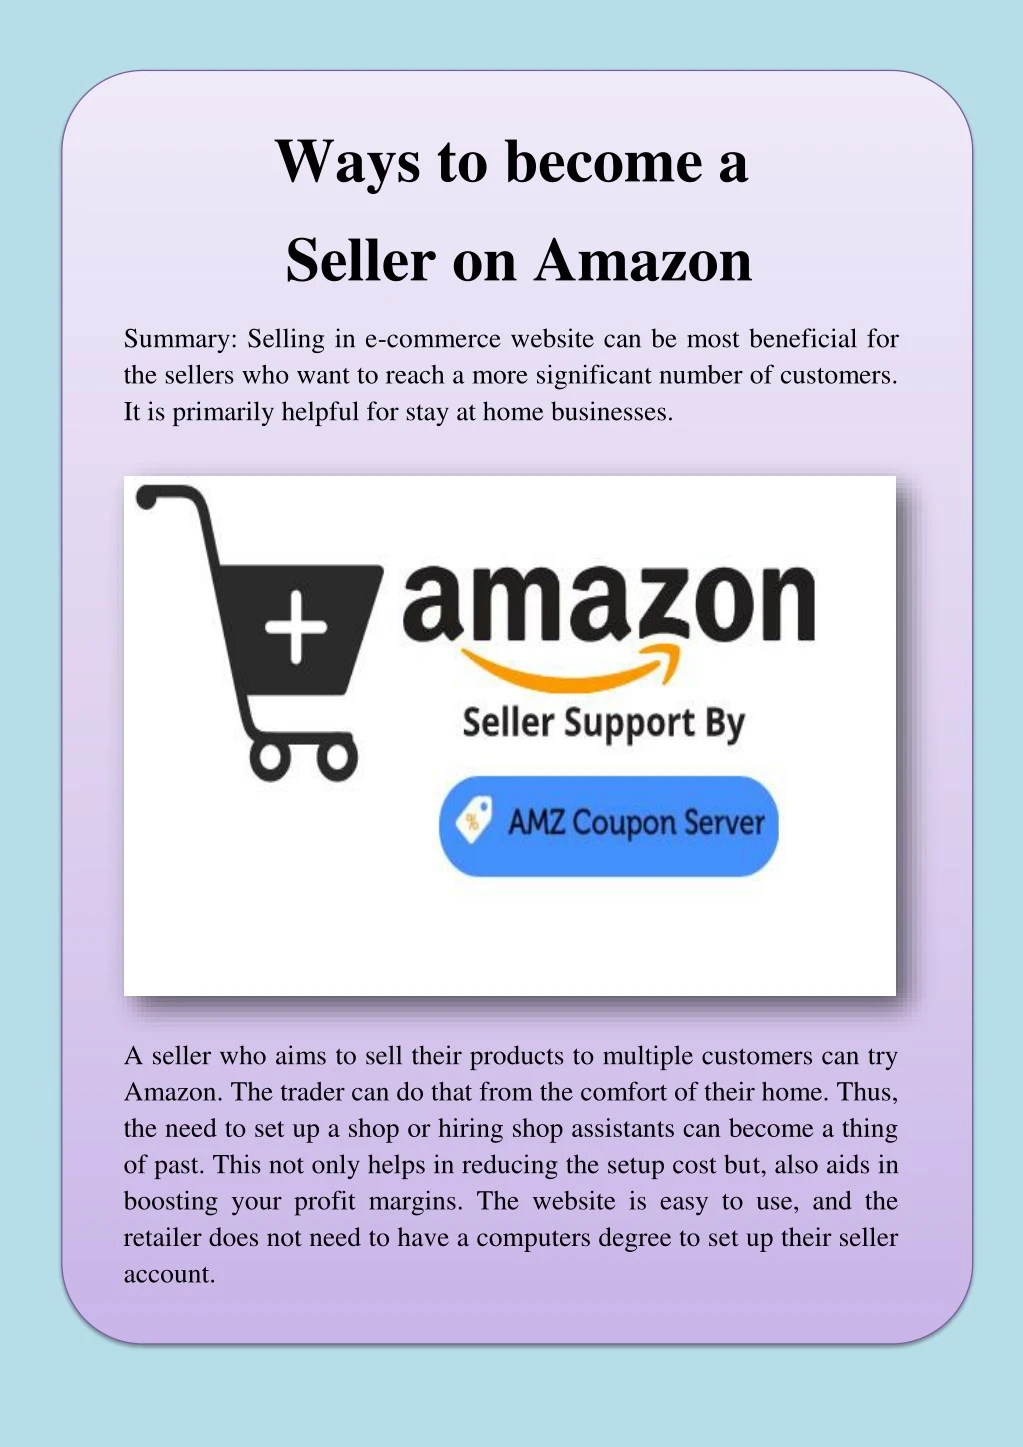 ways to become a seller on amazon